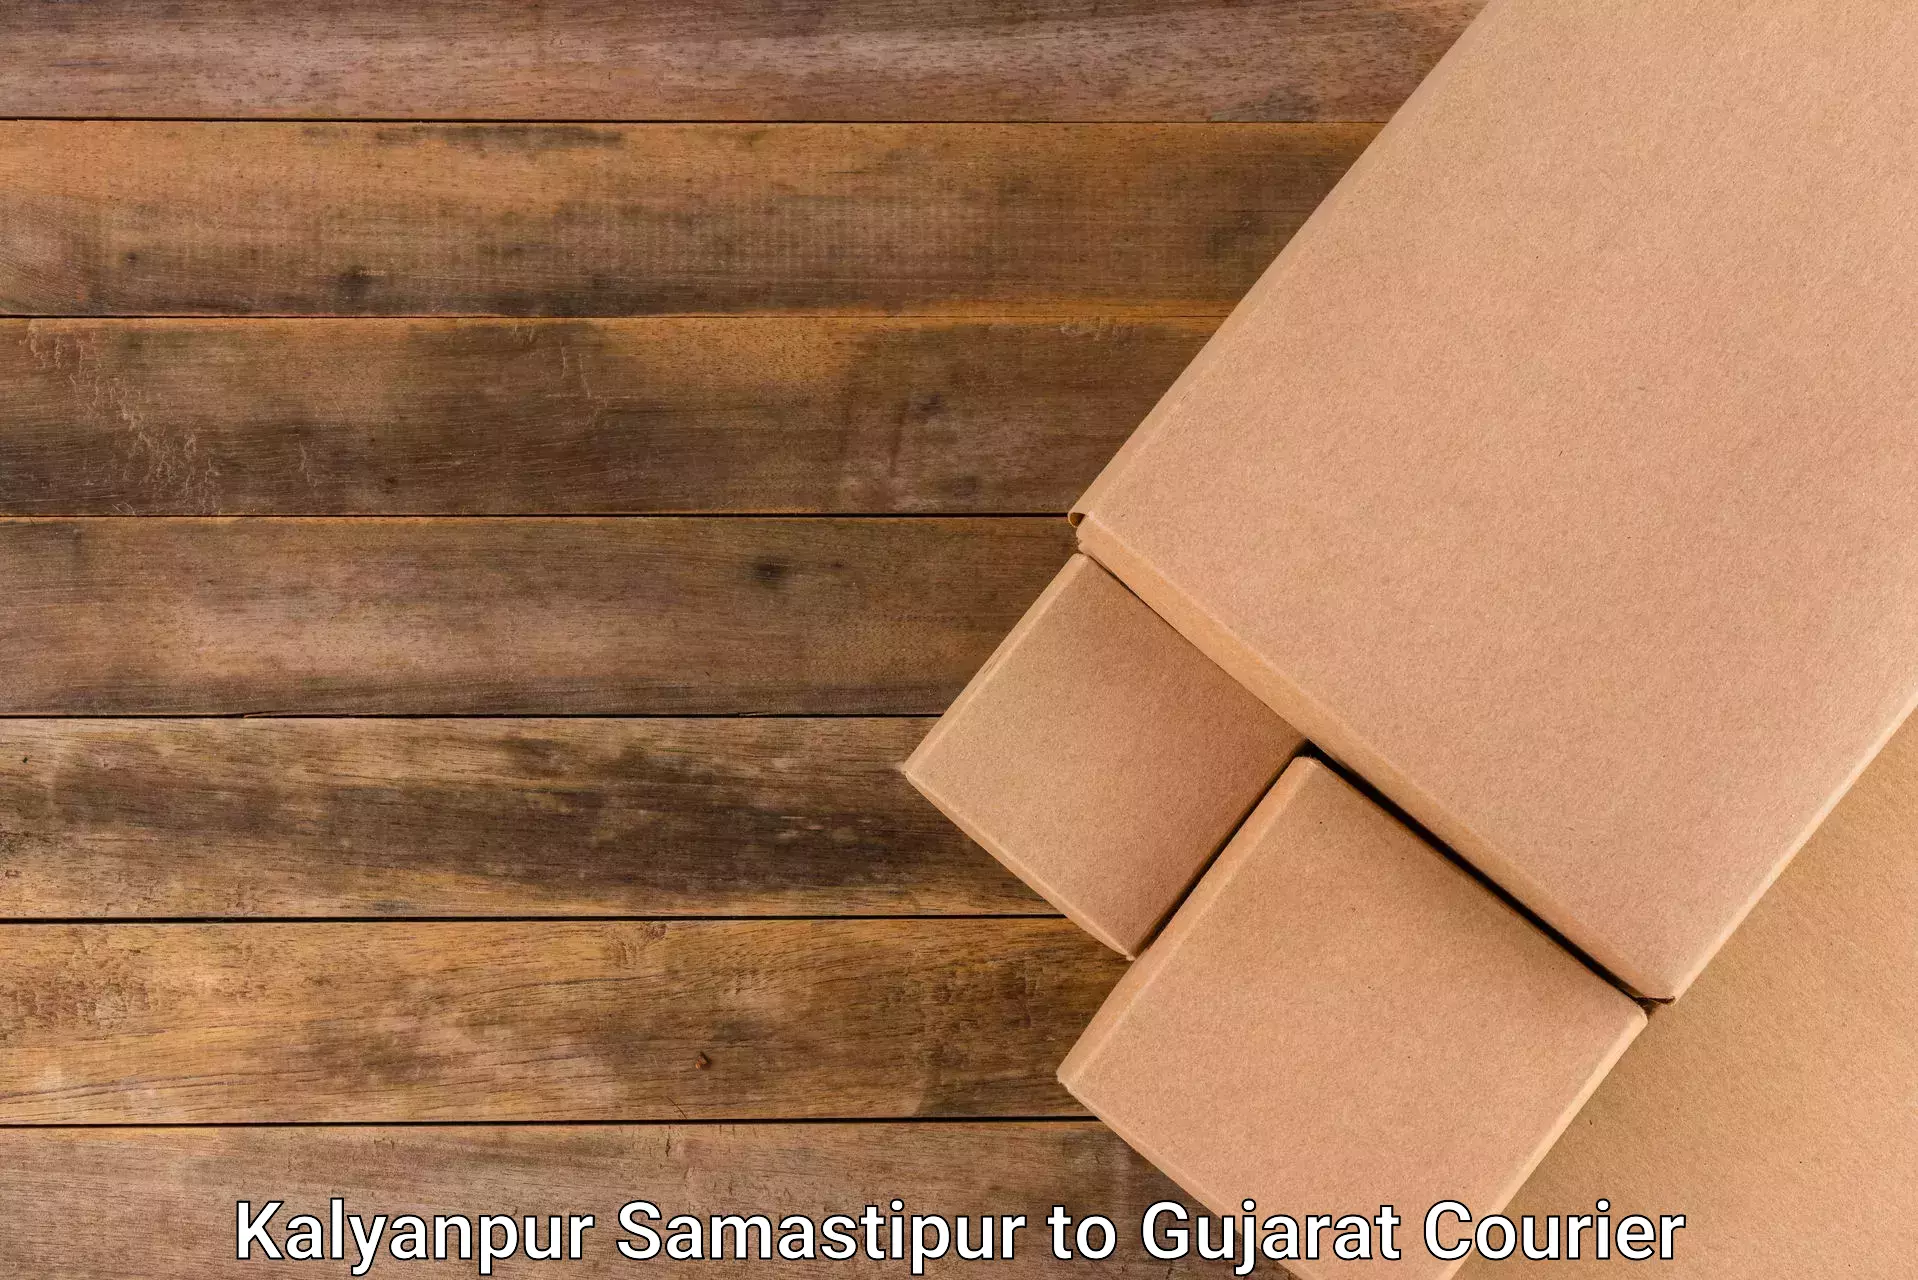 Speedy delivery service in Kalyanpur Samastipur to Ankleshwar